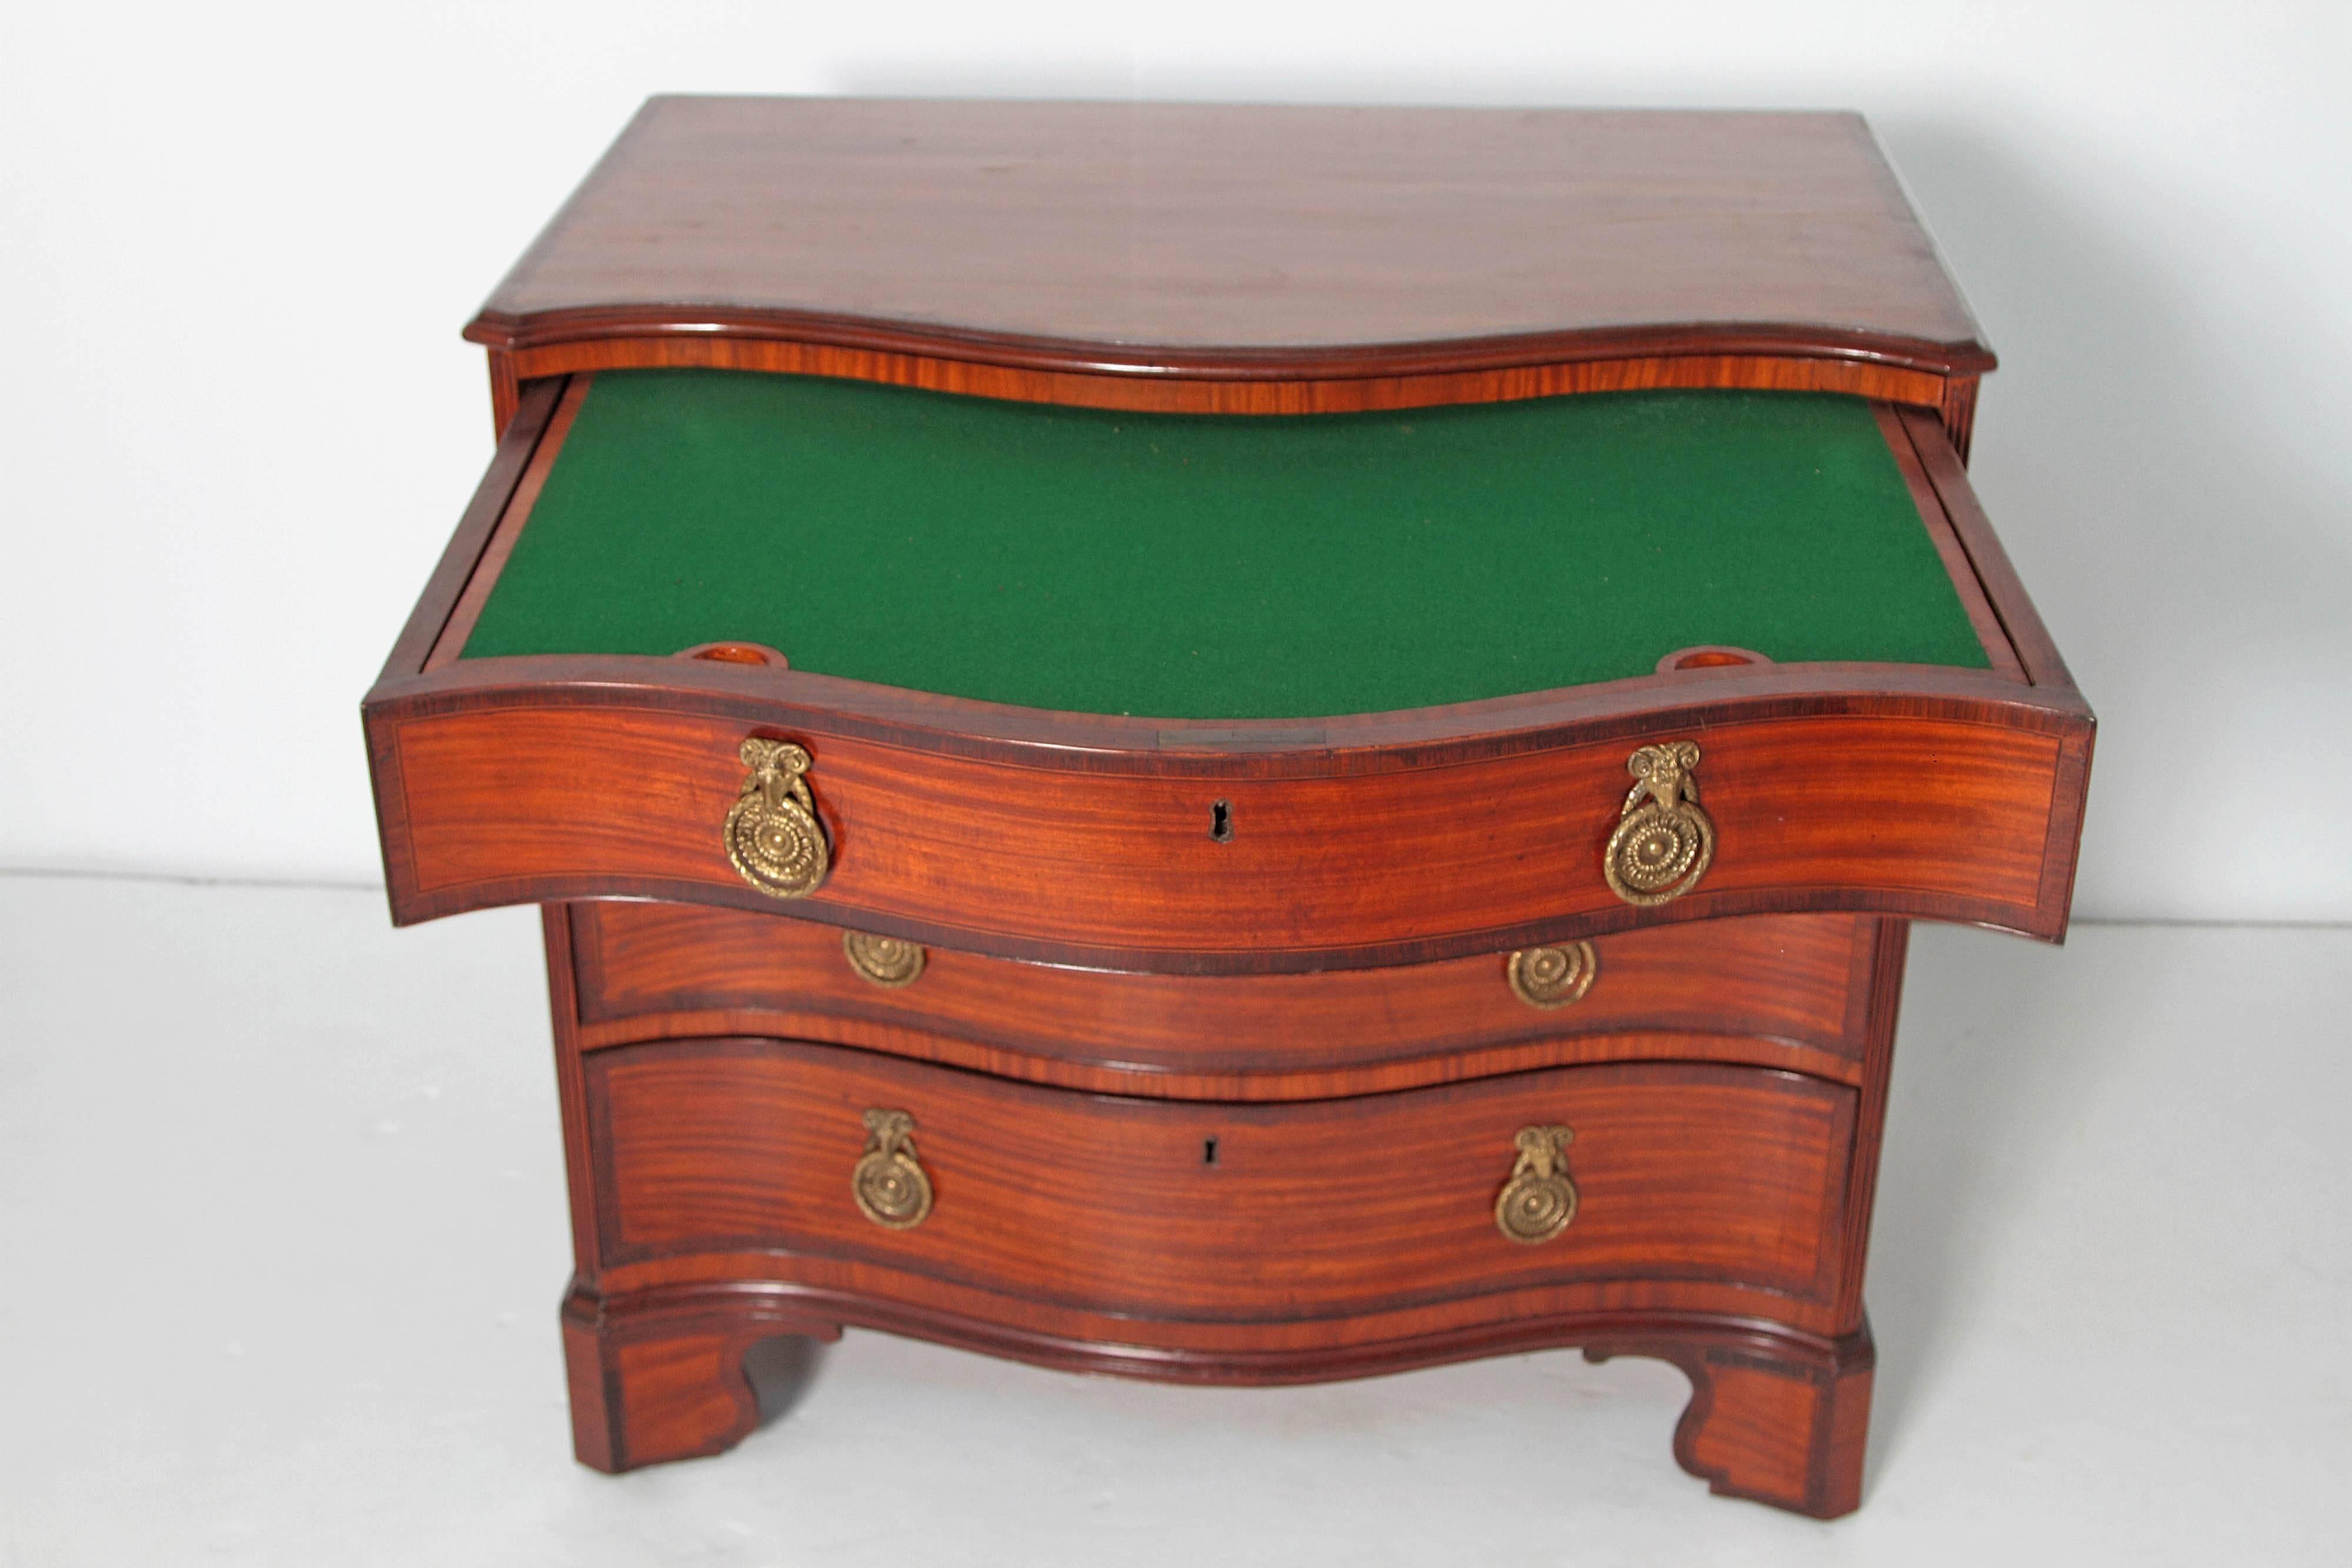 an ingenious and very useful small four-drawer English / Georgian satinwood and mahogany bachelor's chest with serpentine front and inlay around top and drawers, top drawer opens to reveal a baize covered writing slide / work surface with storage